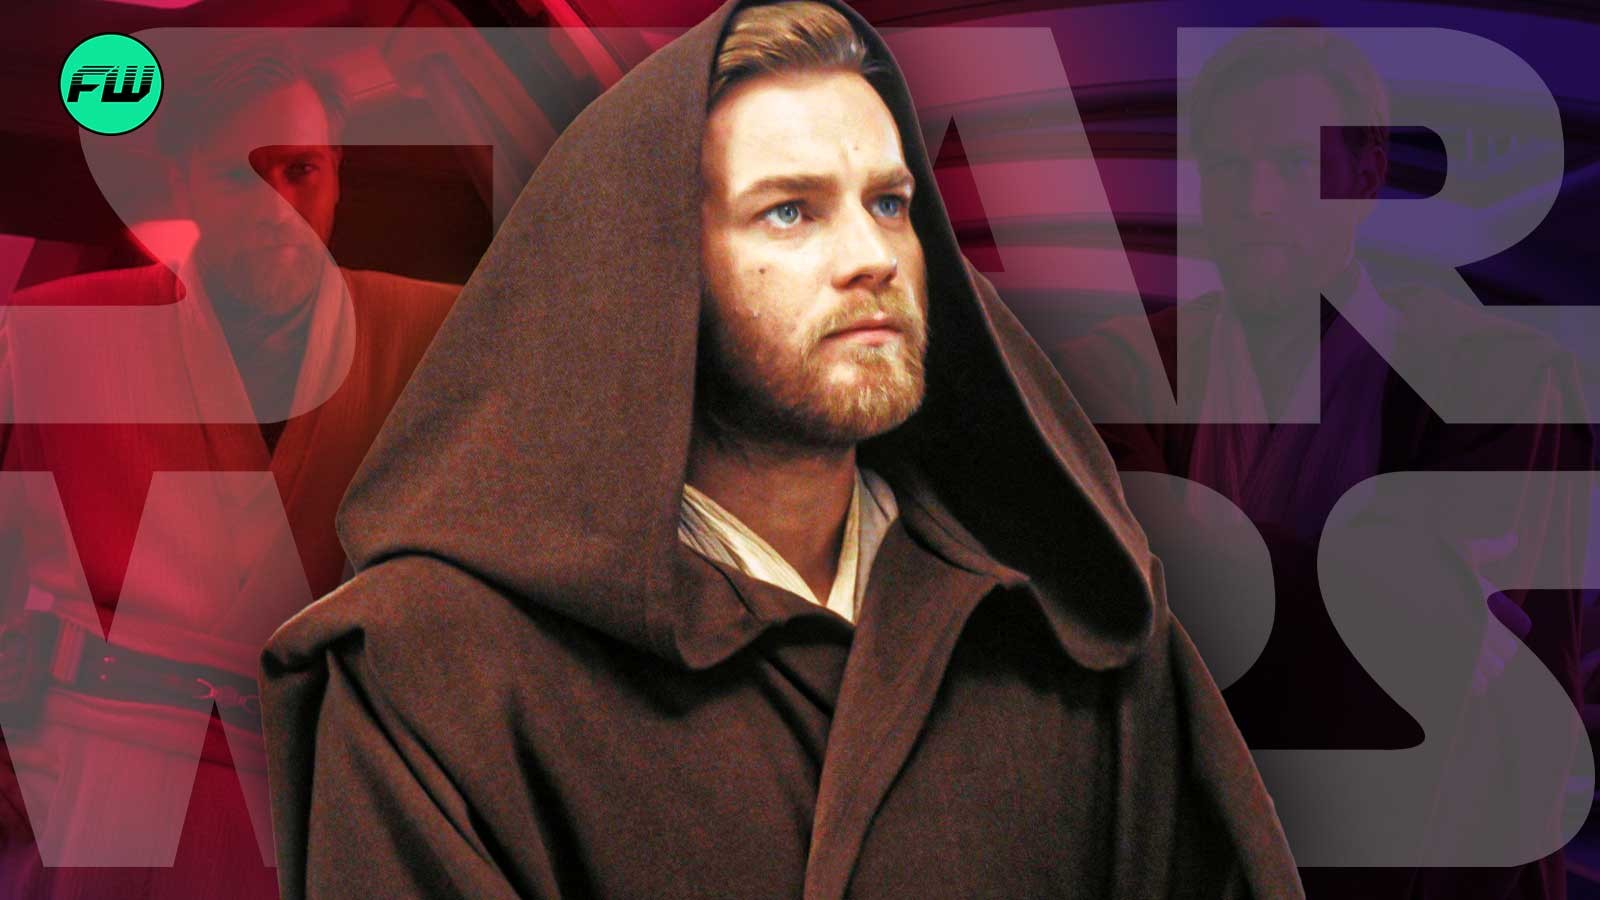 George Lucas’ love for Ewan McGregor made him the best part of the entire Star Wars prequel trilogy